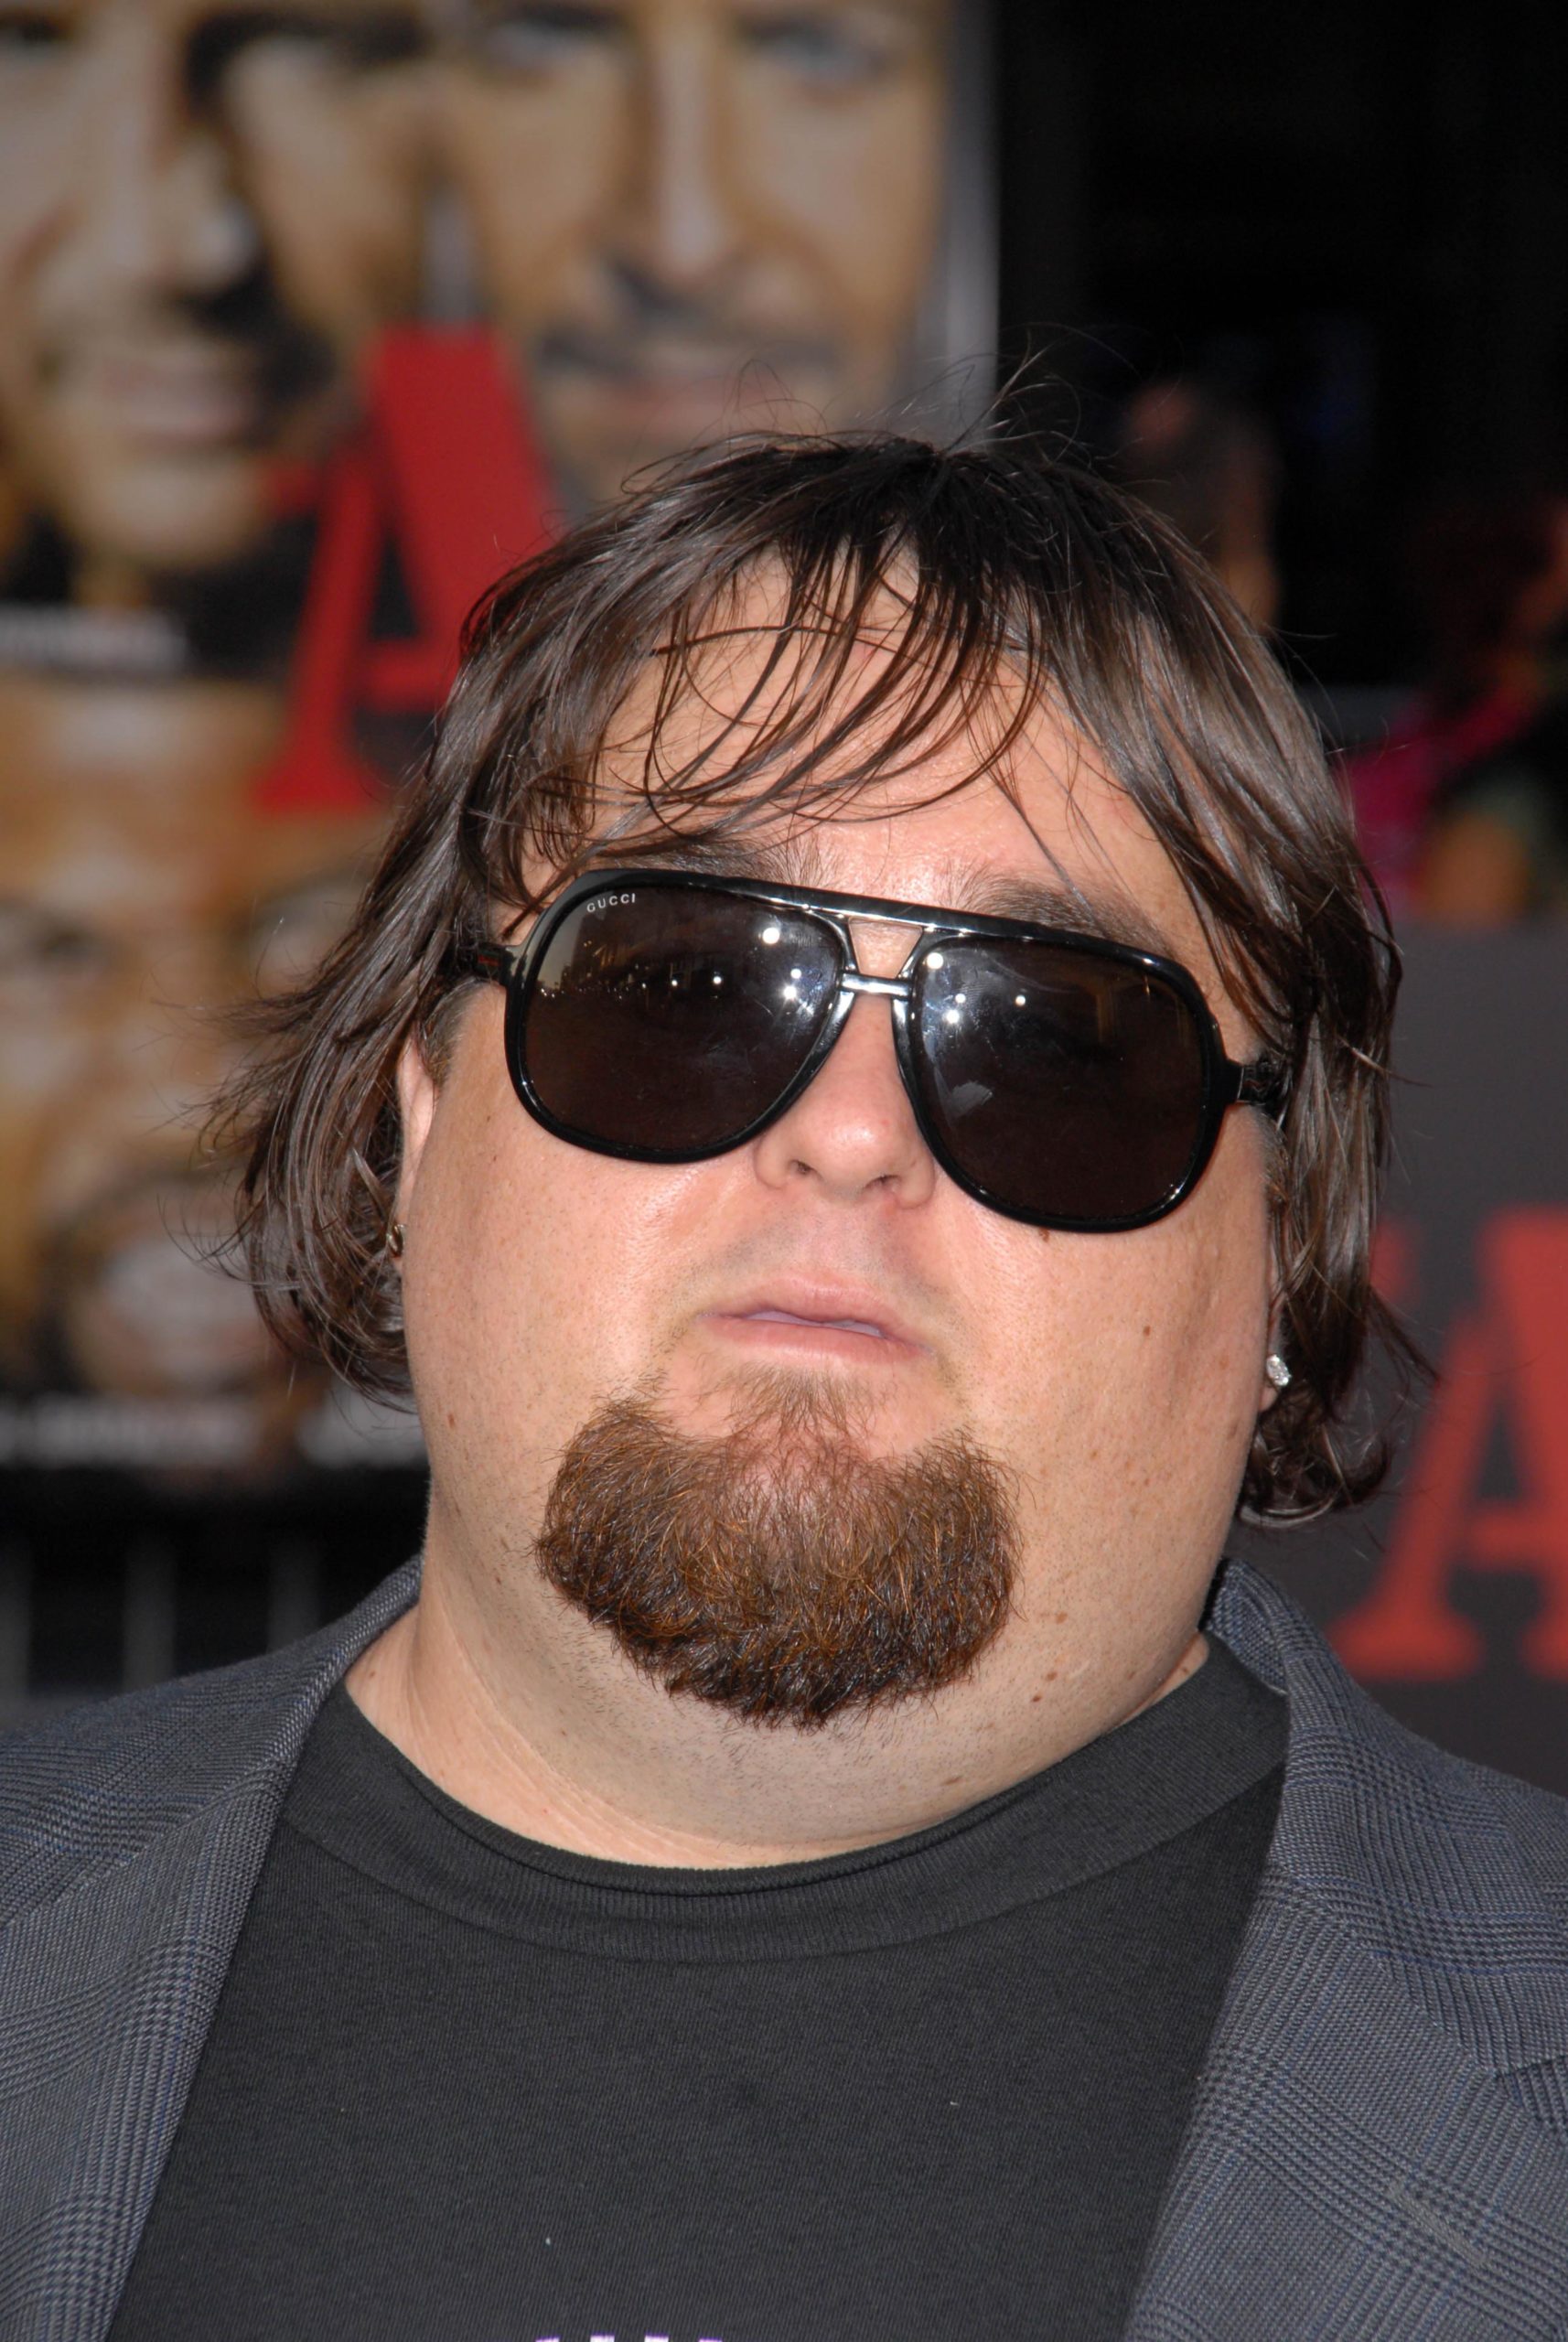 Chumlee From Pawn Stars Is Unrecognizable After 160 Pound Weight Loss